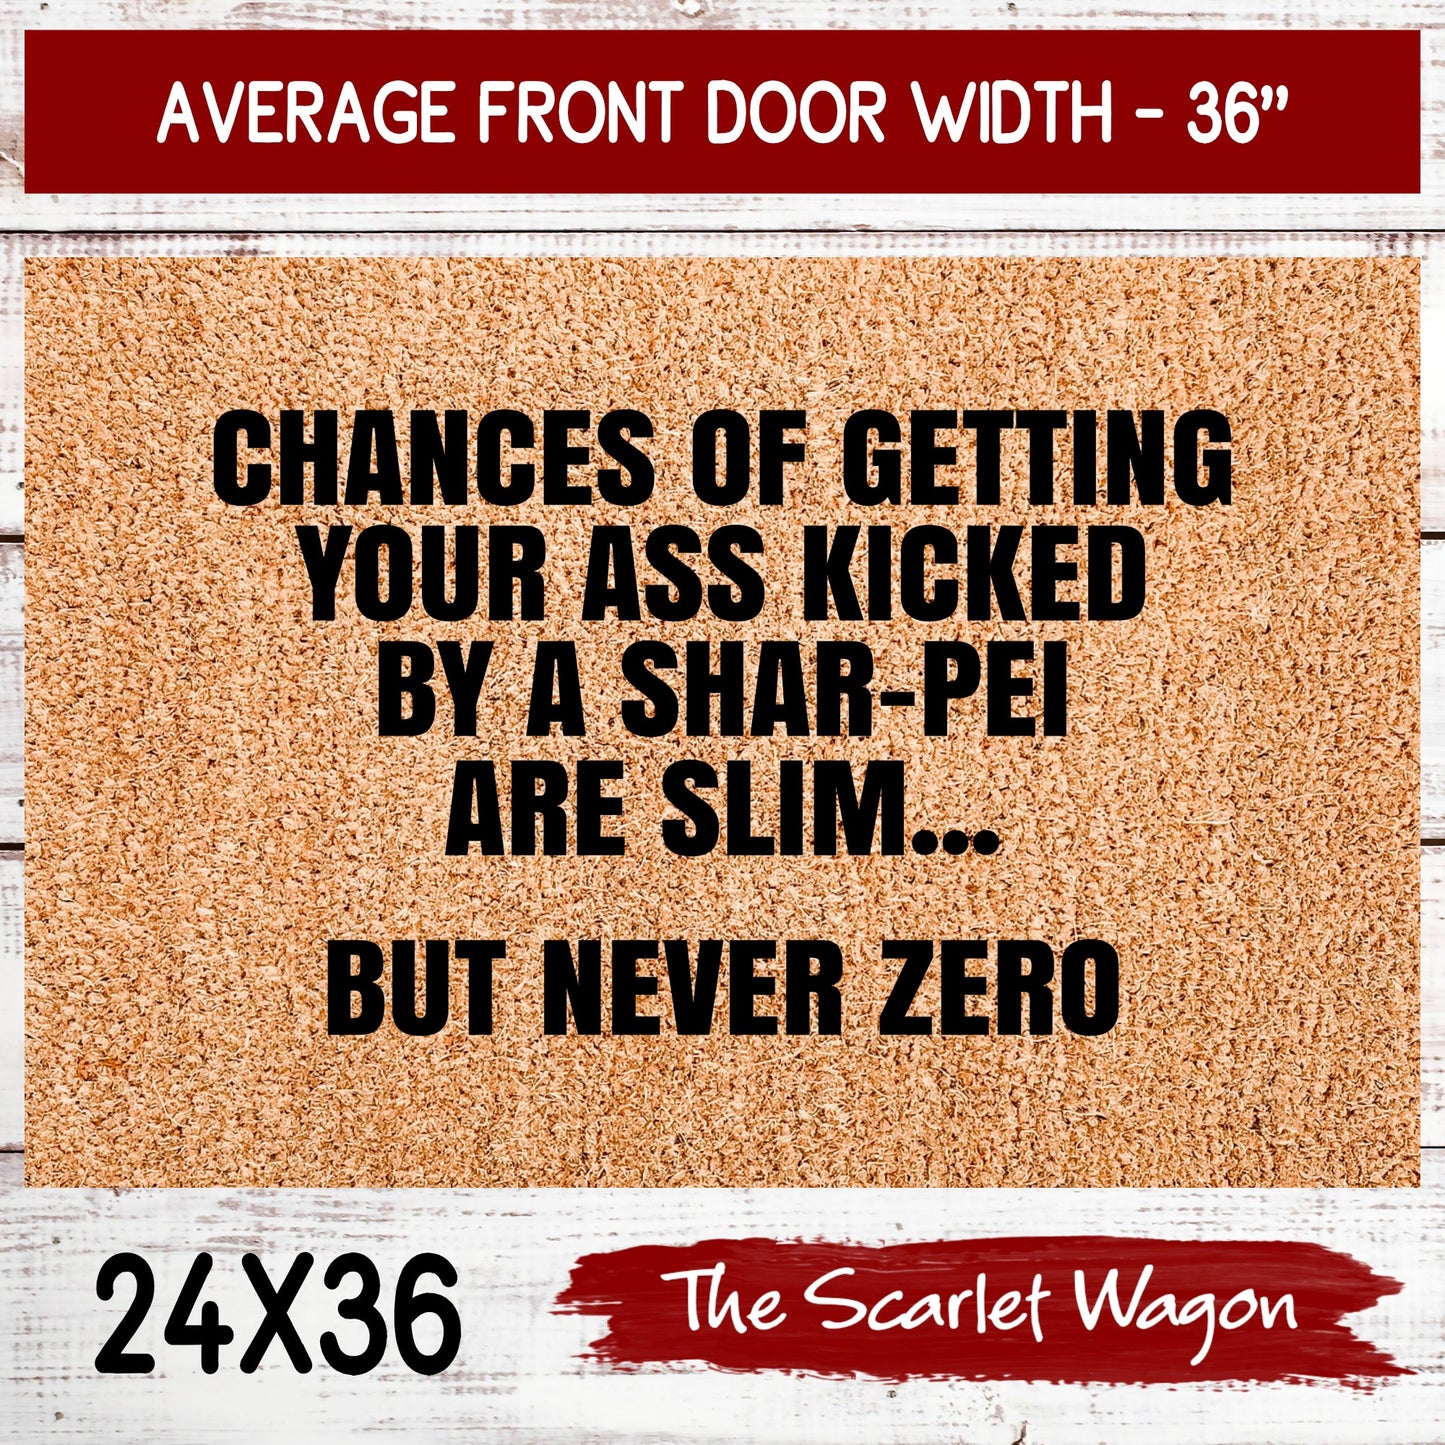 Chances are Slim - Shar-Pei Door Mats teelaunch 24x36 Inches (Free Shipping) 